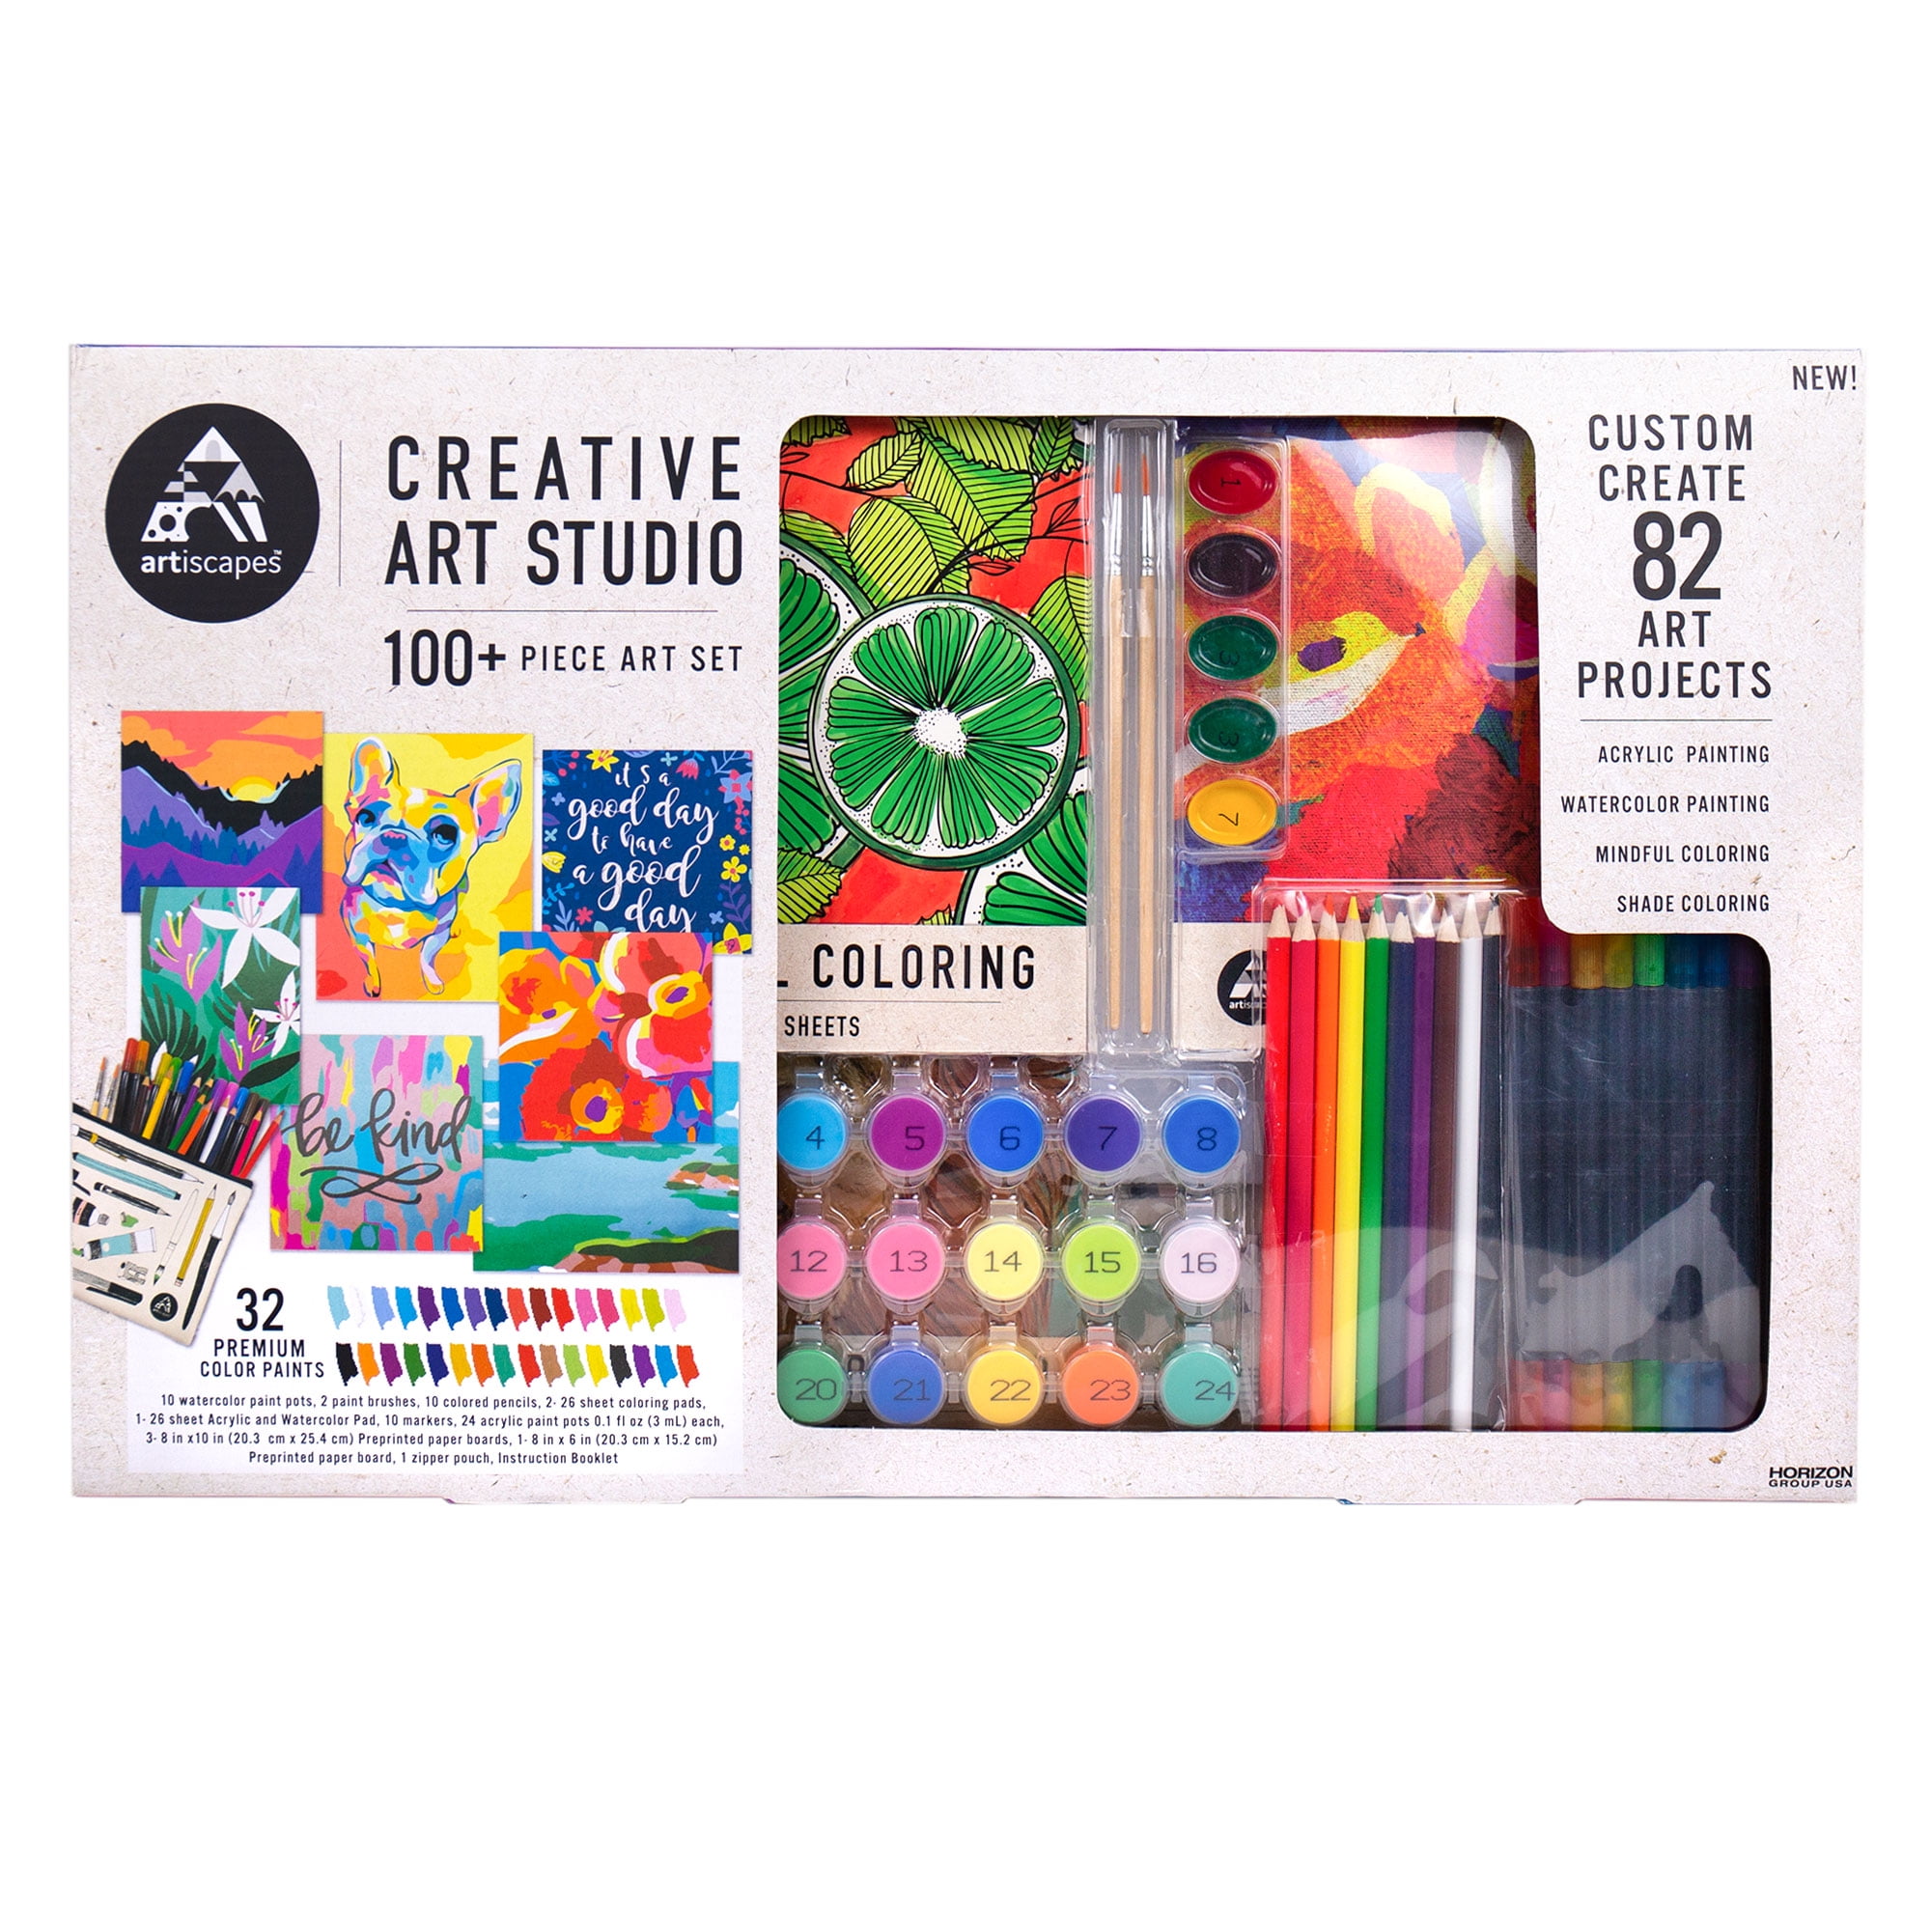 Complete Painting set For Beginers & Students 26 Pieces